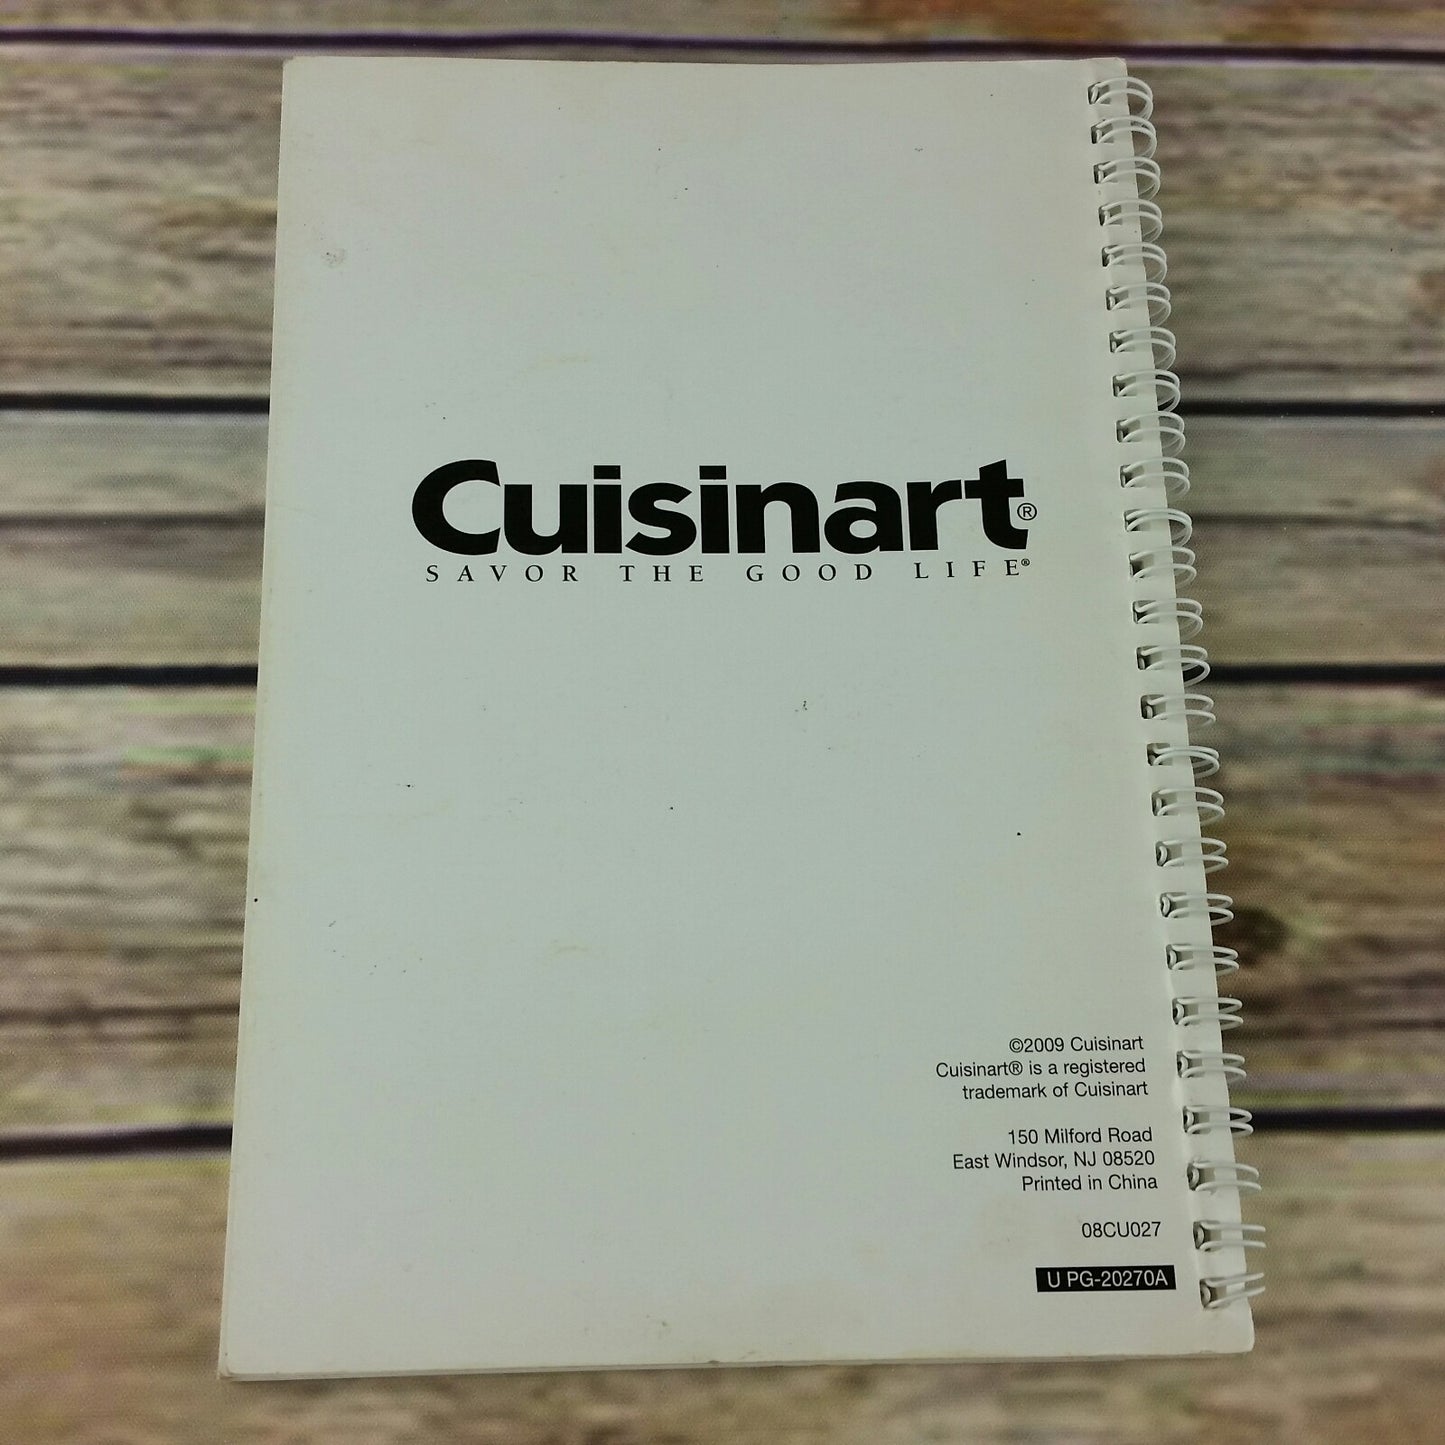 Cuisinart Slow Cooker Cookbook psc-350 Owners Manual Recipes and Instructions - At Grandma's Table